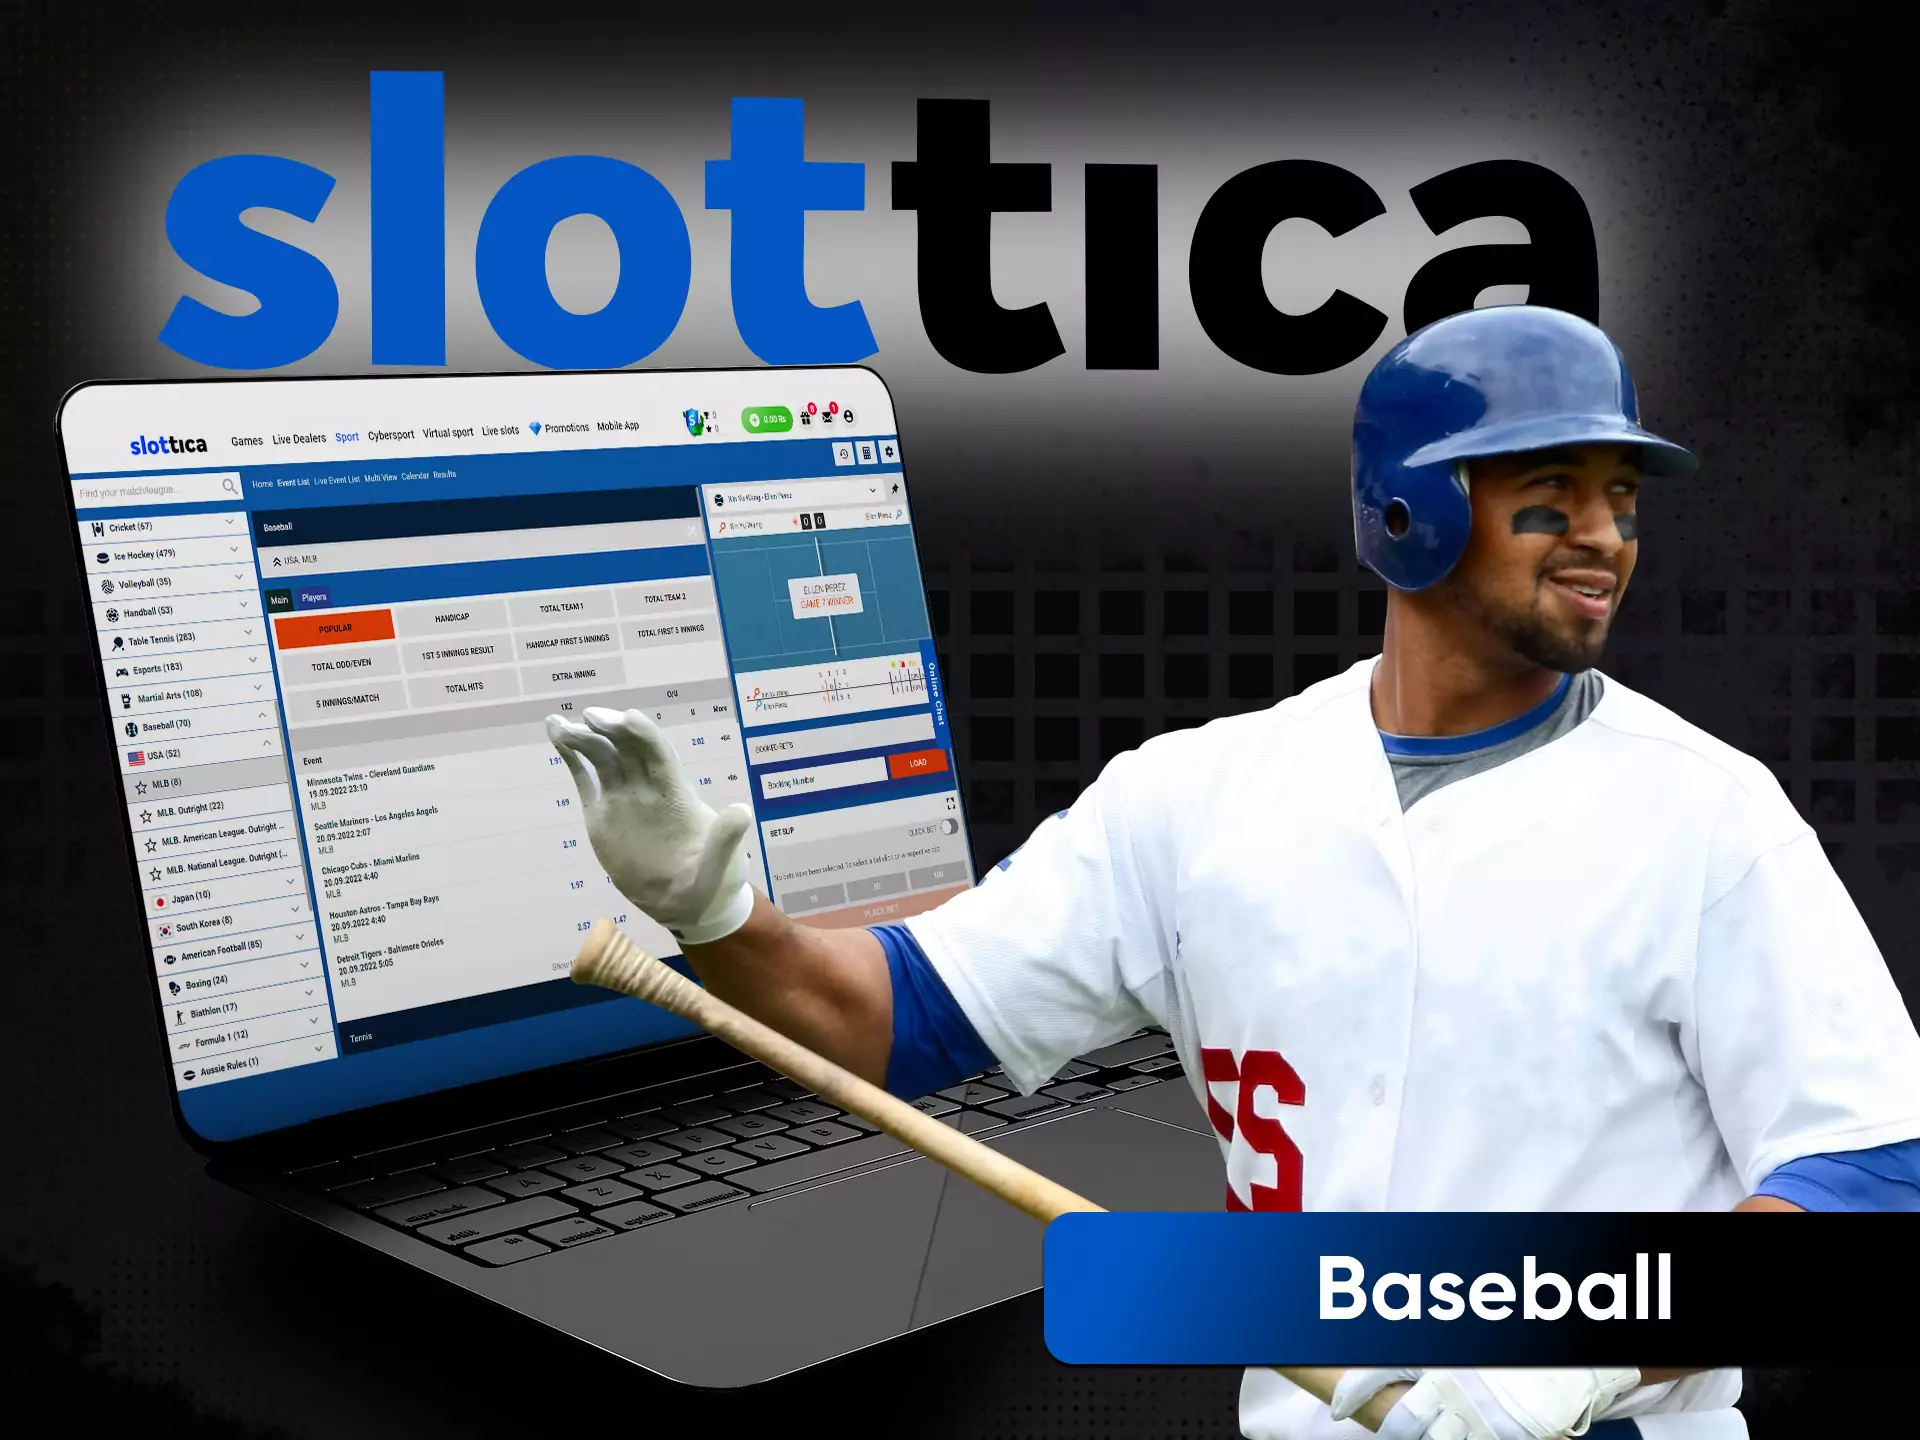 On the Slottica website, sports fans place bets on baseball.